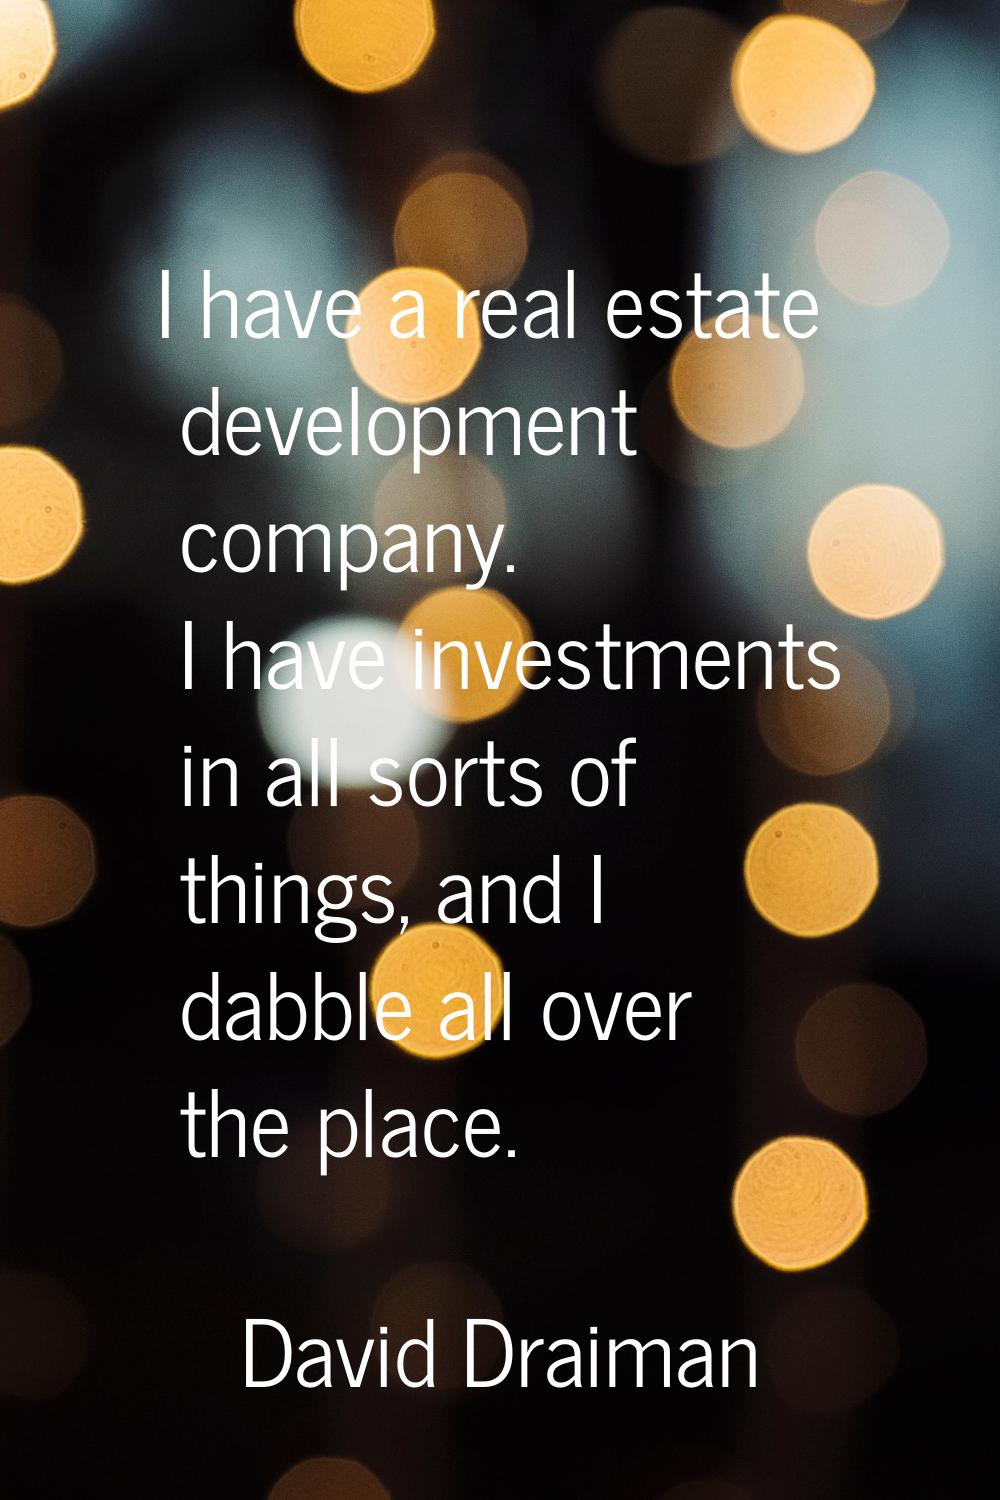 I have a real estate development company. I have investments in all sorts of things, and I dabble a